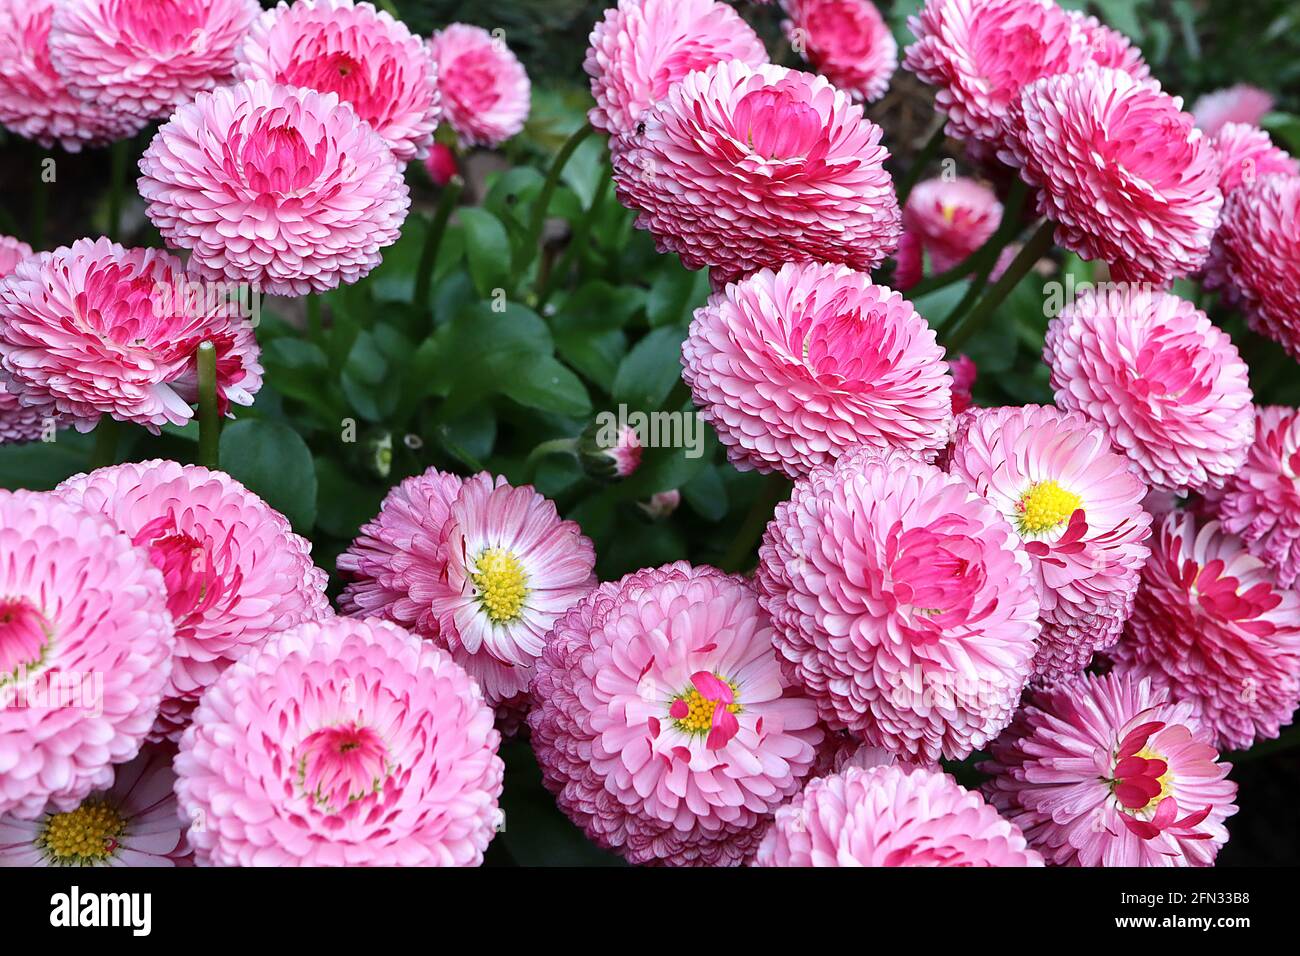 Bellis perennis ‘Bam Bam Red’ Double daisy – bicolored flowers with red outer petals and white inner petals,  May, England, UK Stock Photo